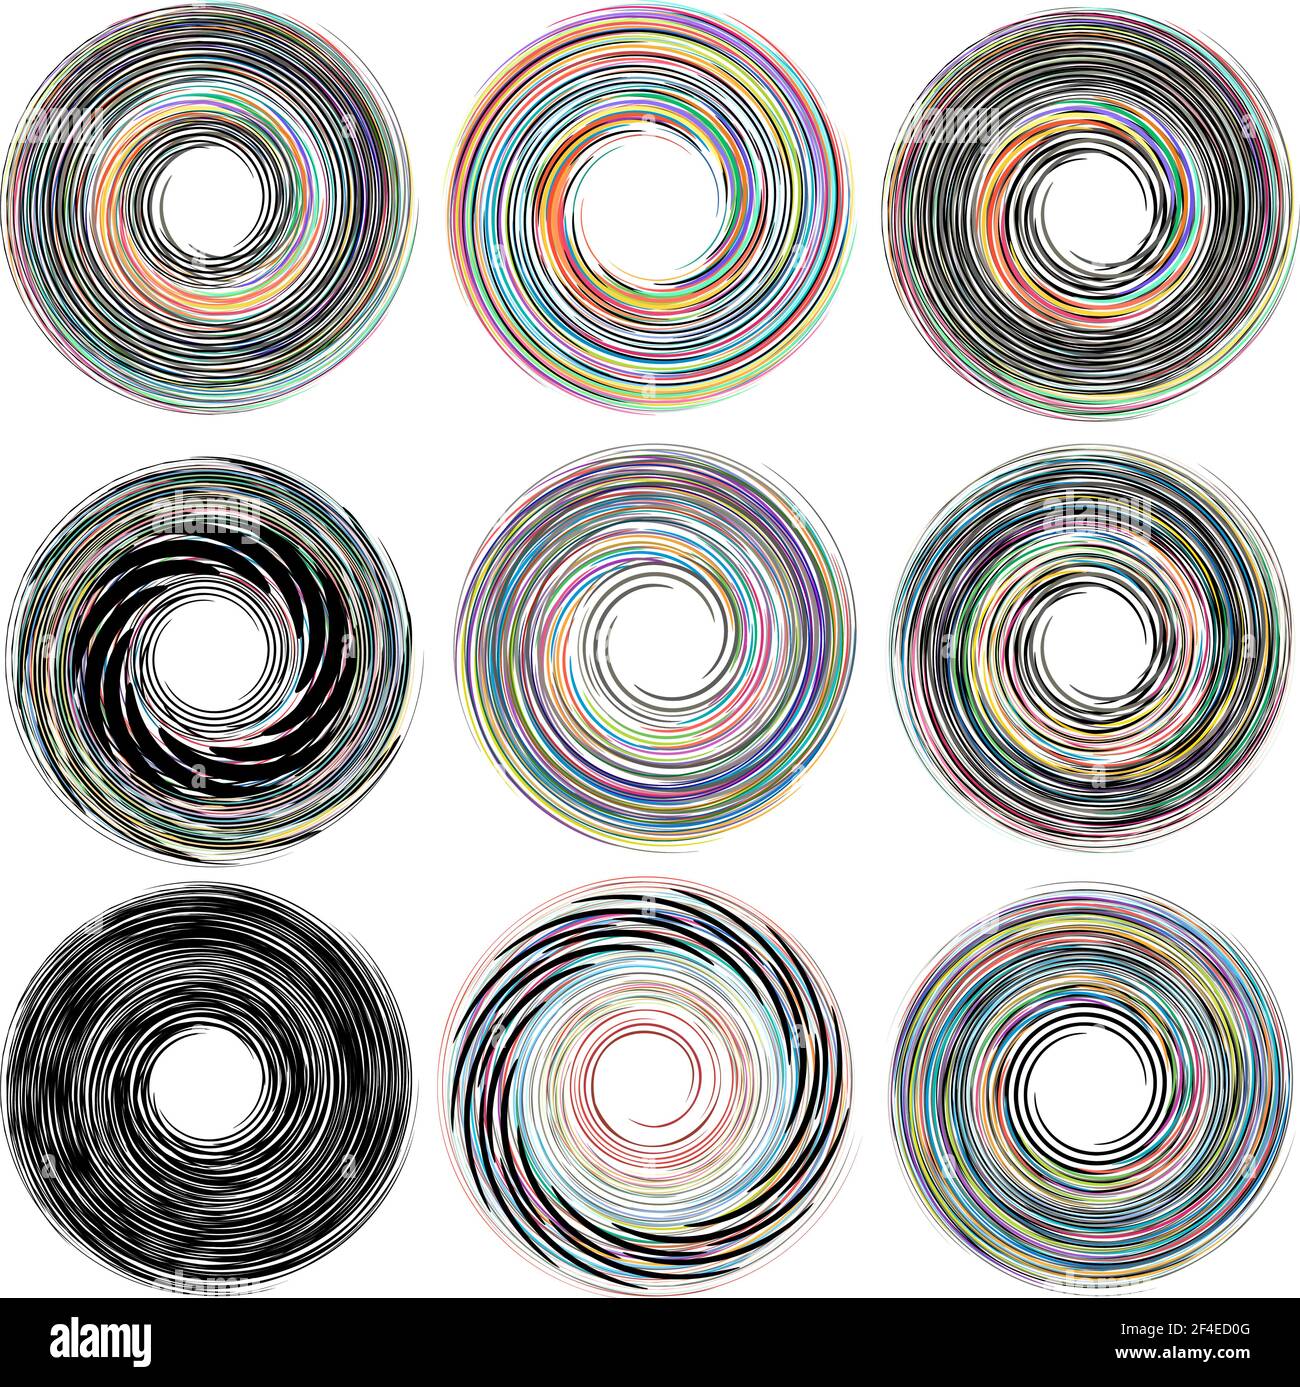 Spiral, twirl, whirlpool element vector illustration. Cochlear, helix, and volute Stock Vector